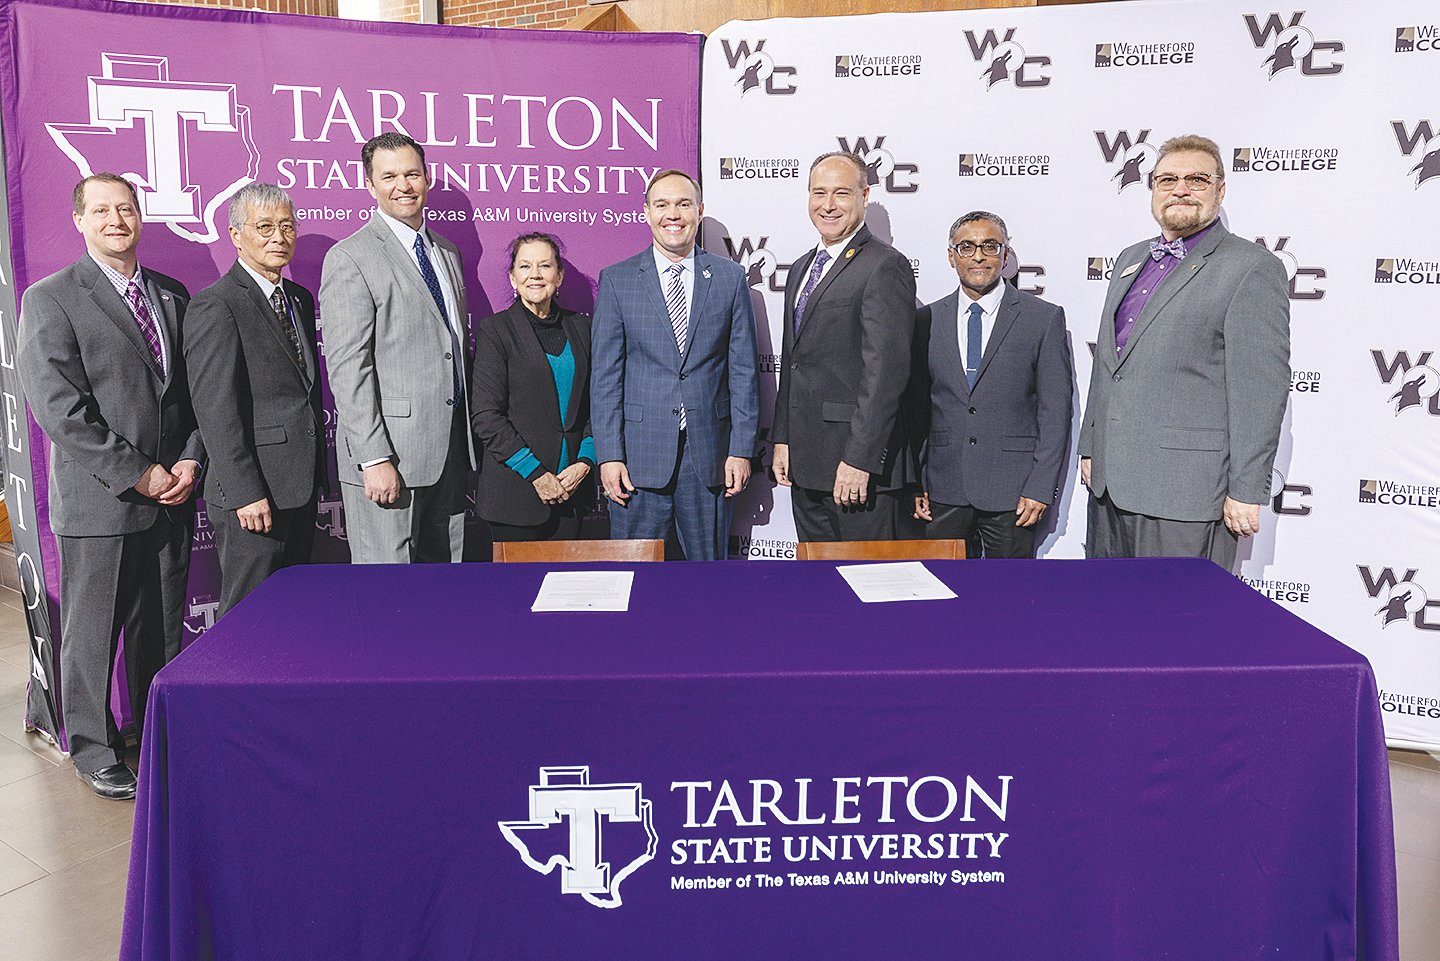 Representatives of Tarleton State University and Weatherford College signed an articulation agreement on March 8.